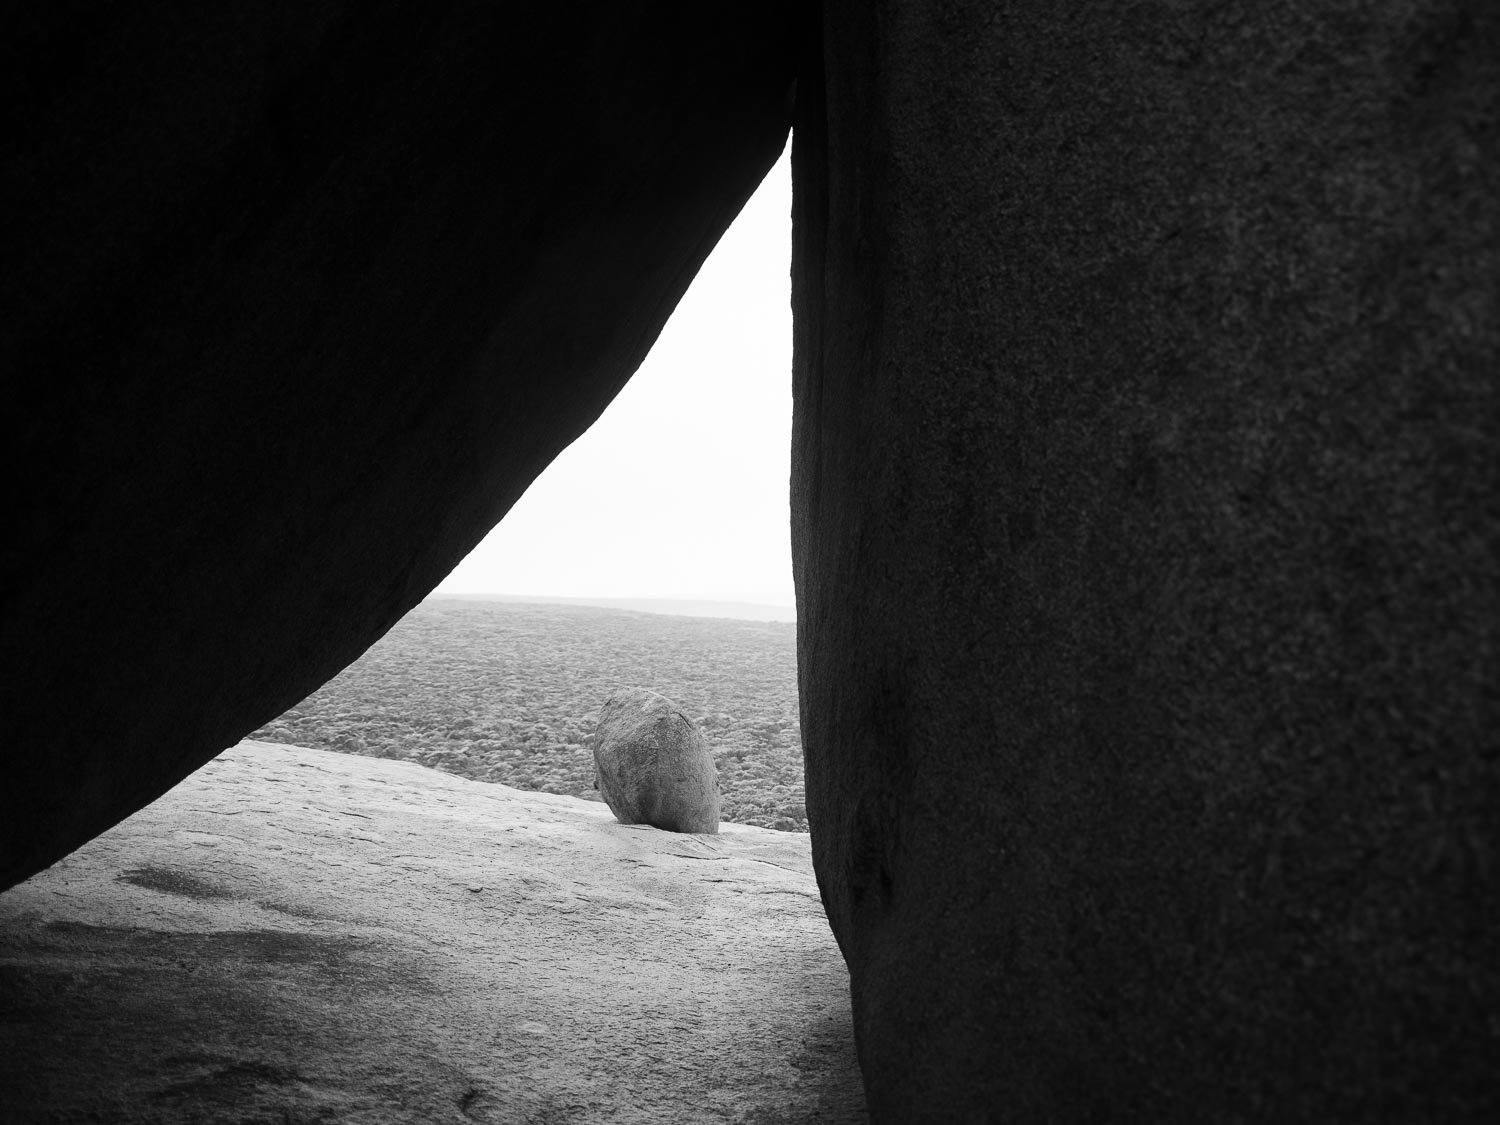 Black and white view of a windowing shape between two large boulders, Remarkable Rocks #15 - Kangaroo Island SA